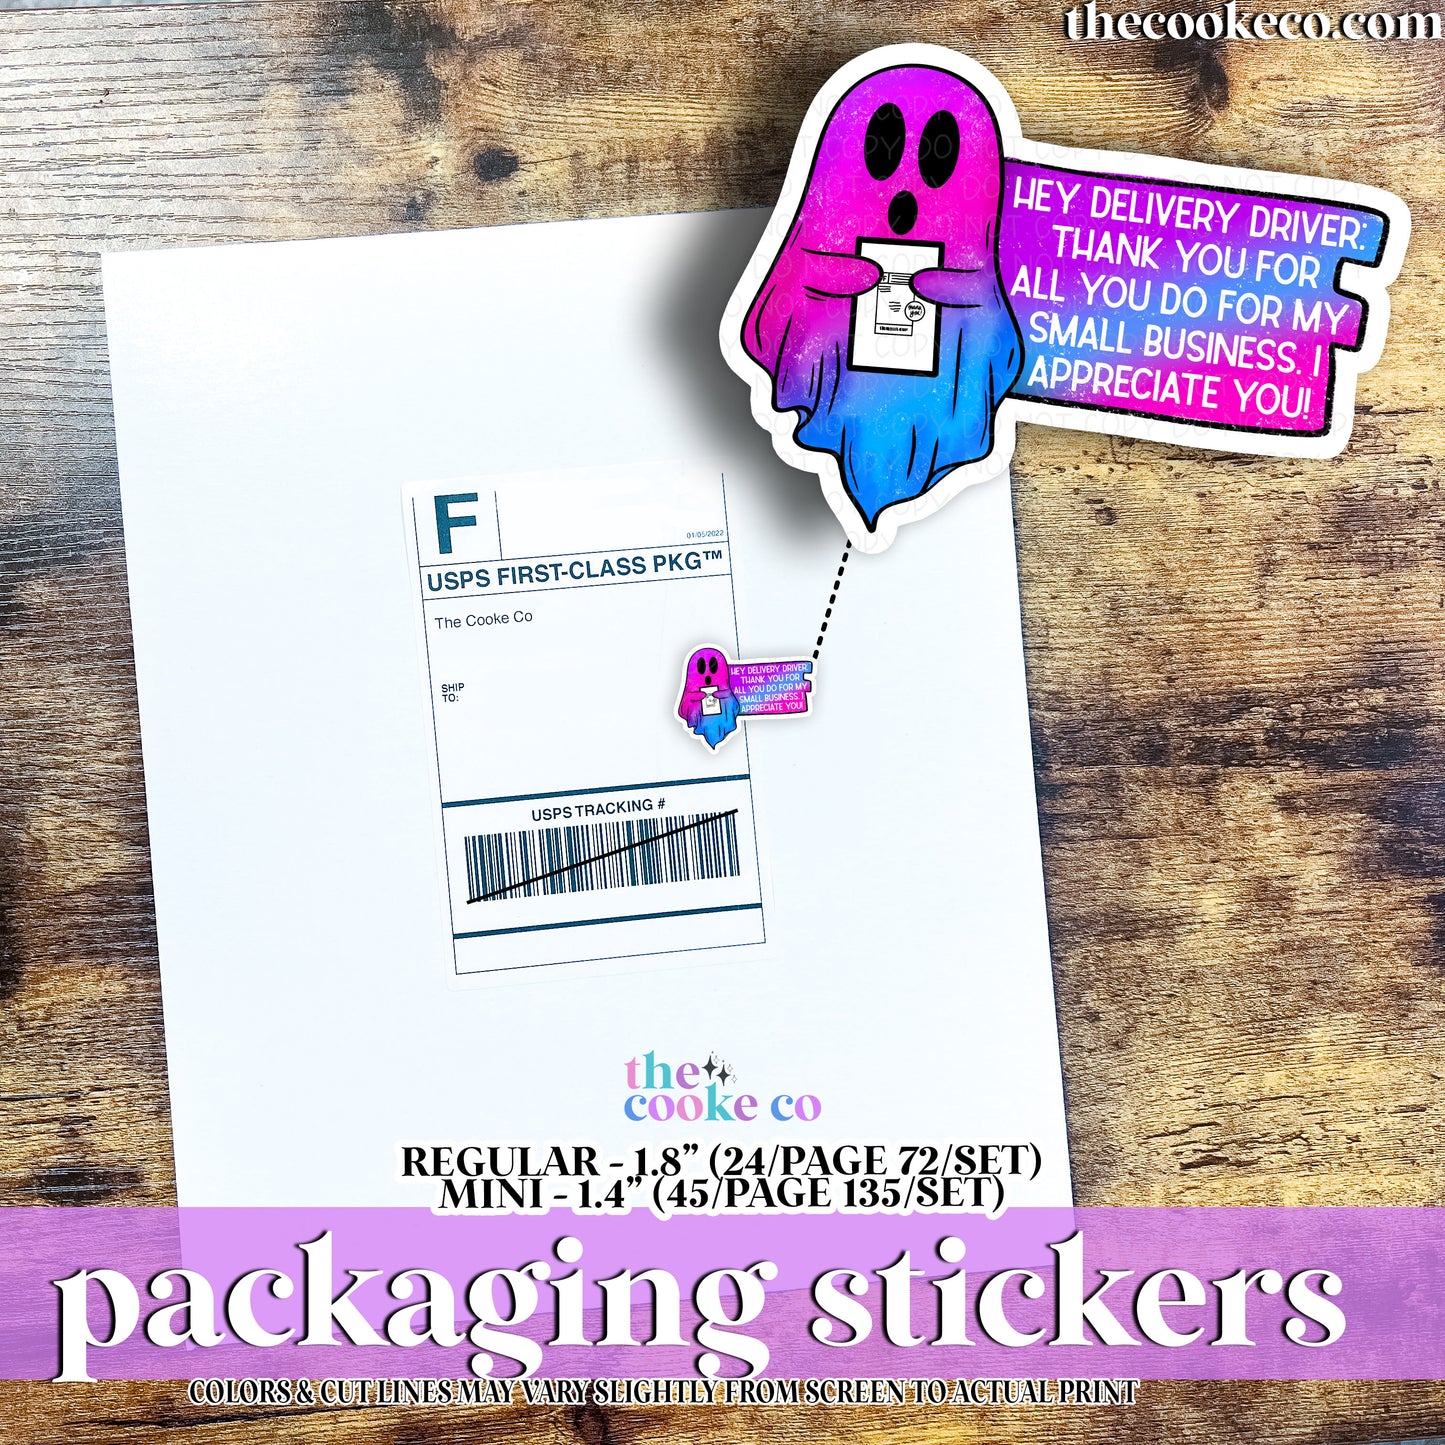 Packaging Stickers | #C0990 - HEY DELIVERY DRIVER GHOSTIE